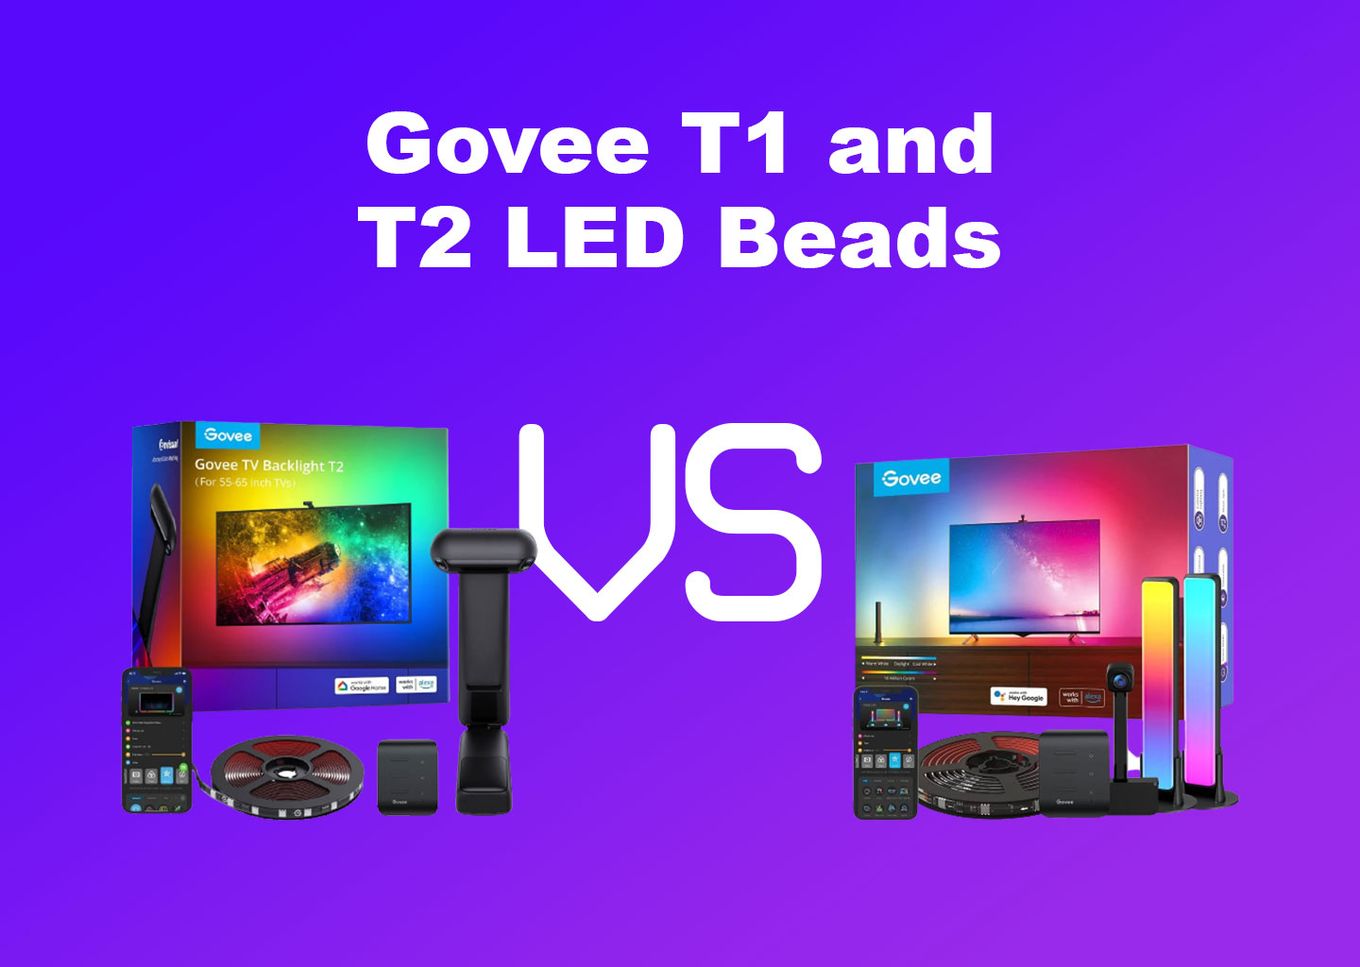 Govee unveils TV Backlight T2 with dual camera, more light beads per meter,  and better color accuracy